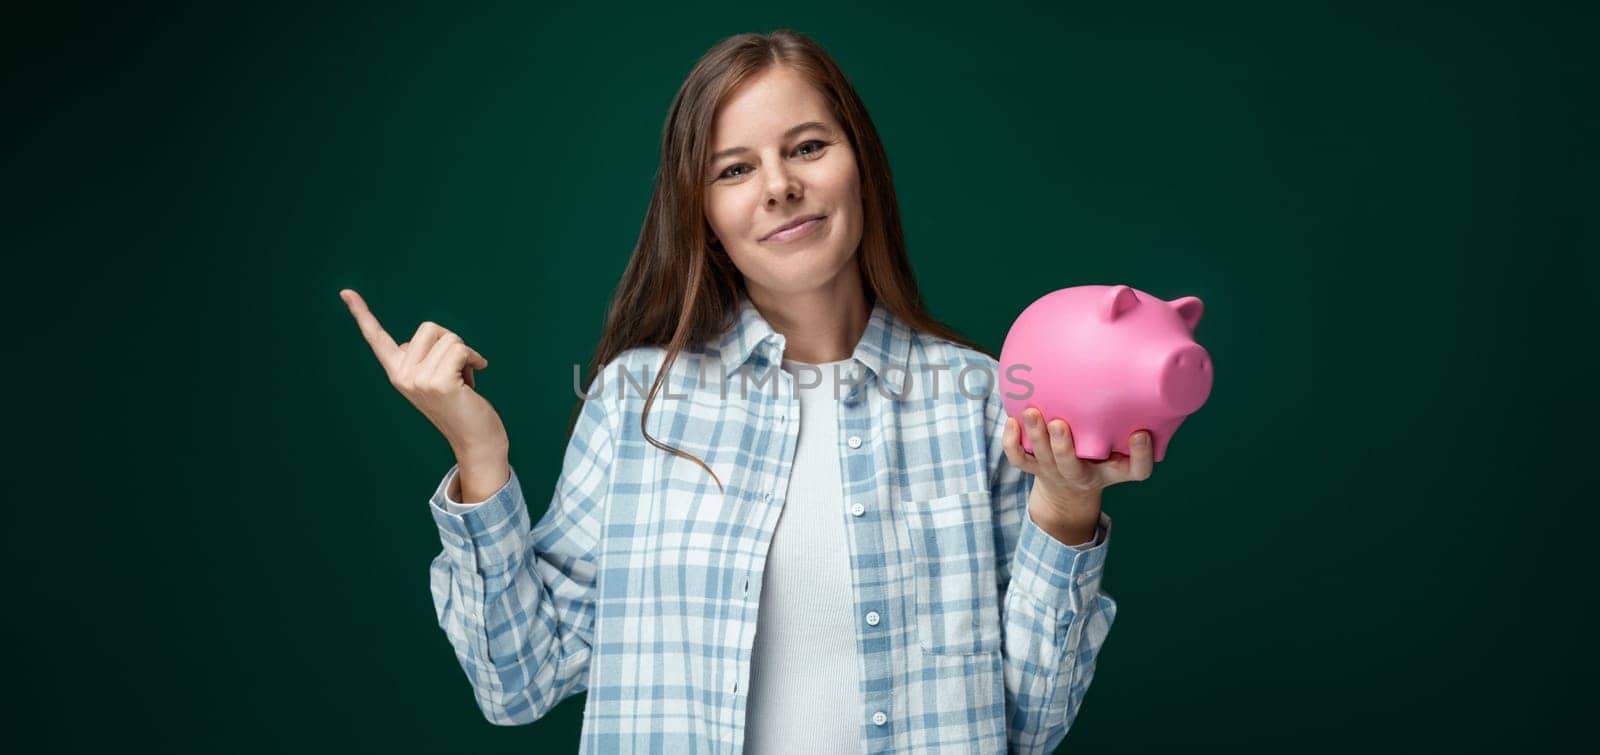 Charming young woman with brown hair holding a piggy bank and pointing her finger up.